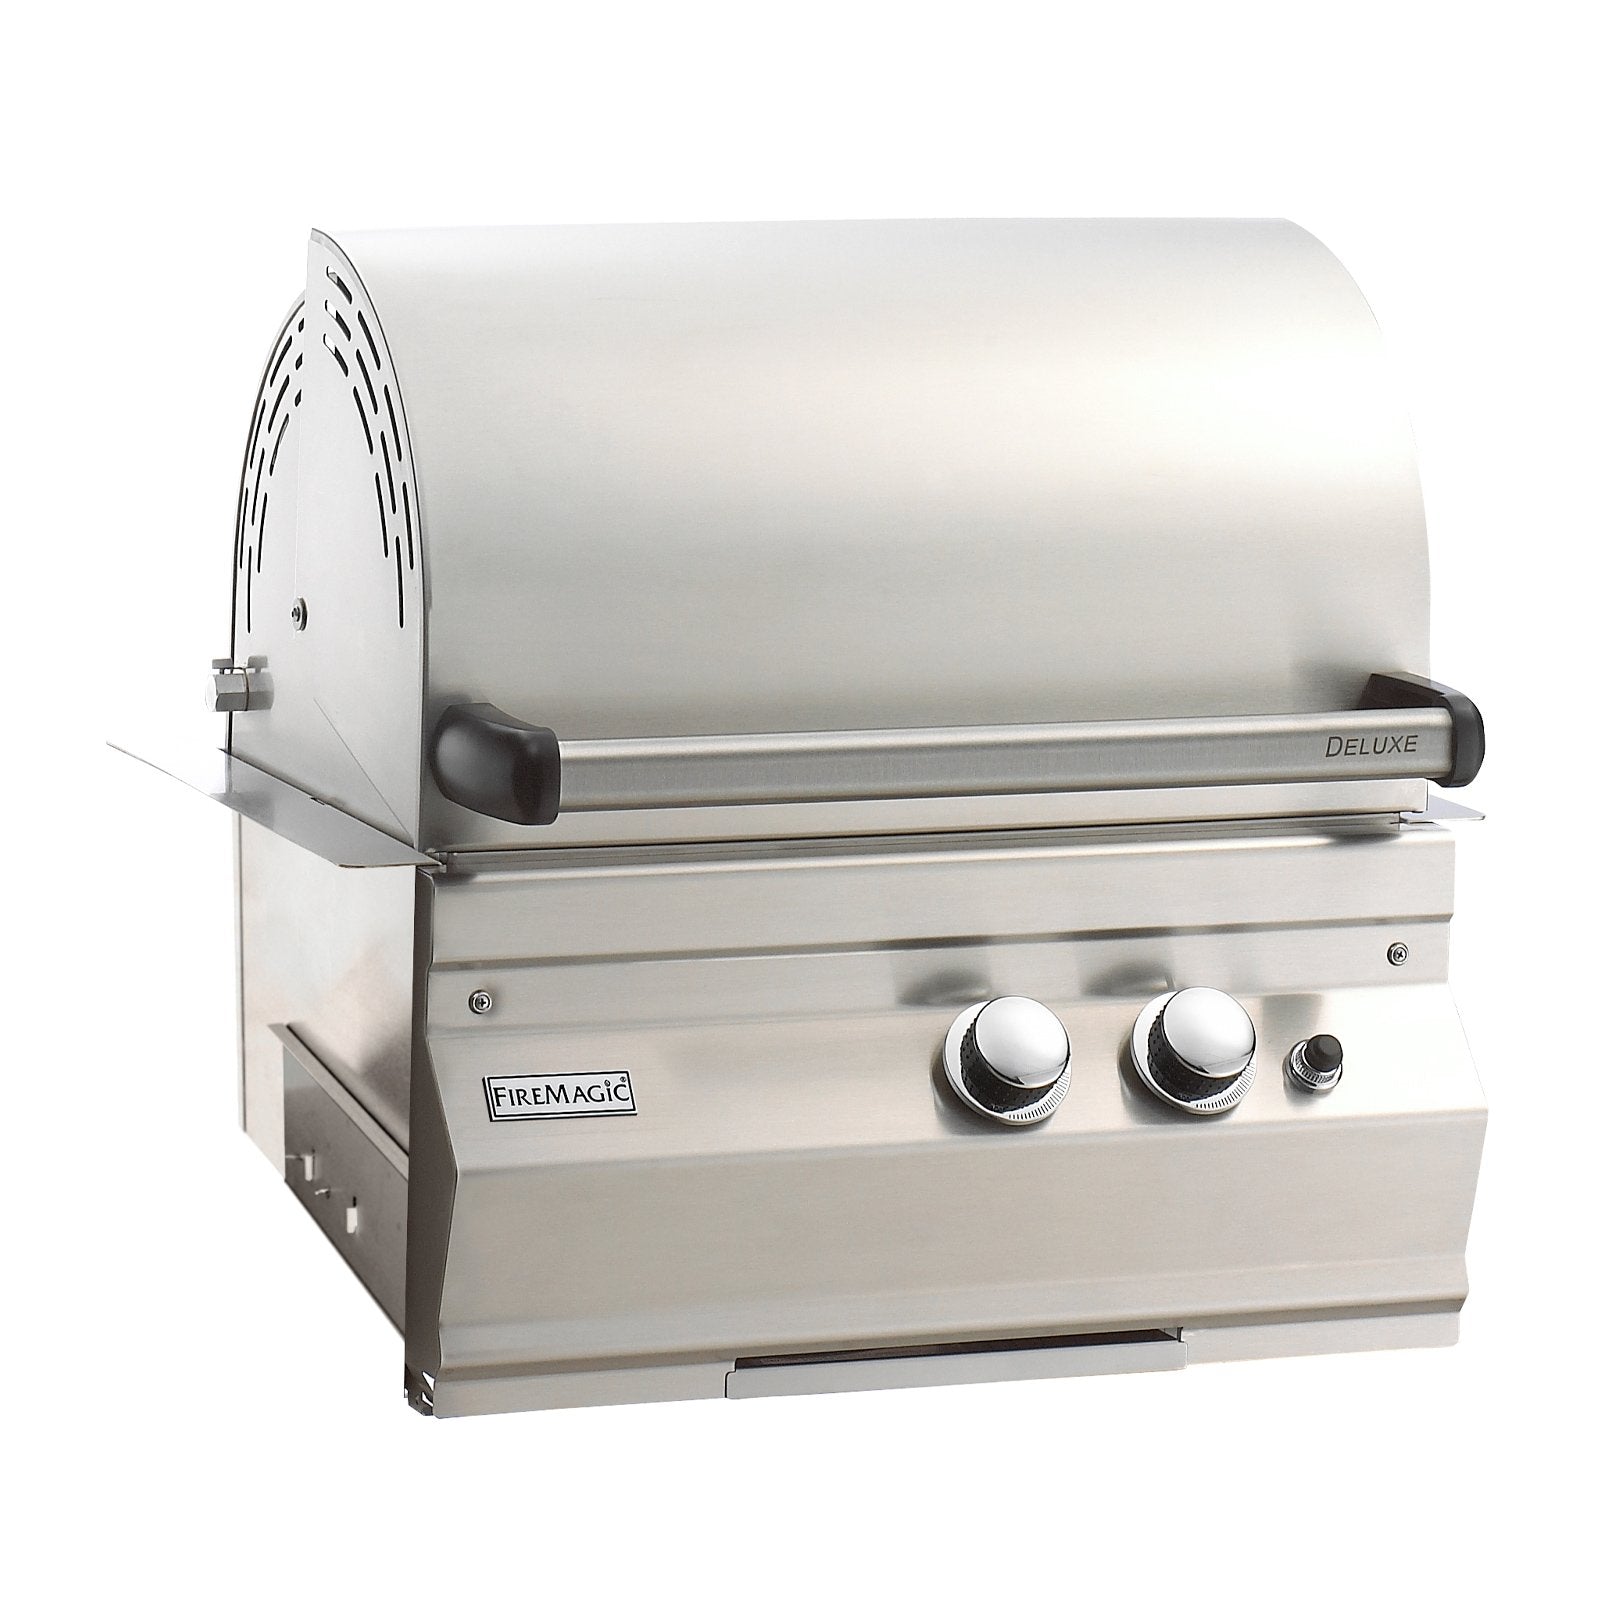 fire-magic-24-2-burner-legacy-deluxe-built-in-gas-grill 1